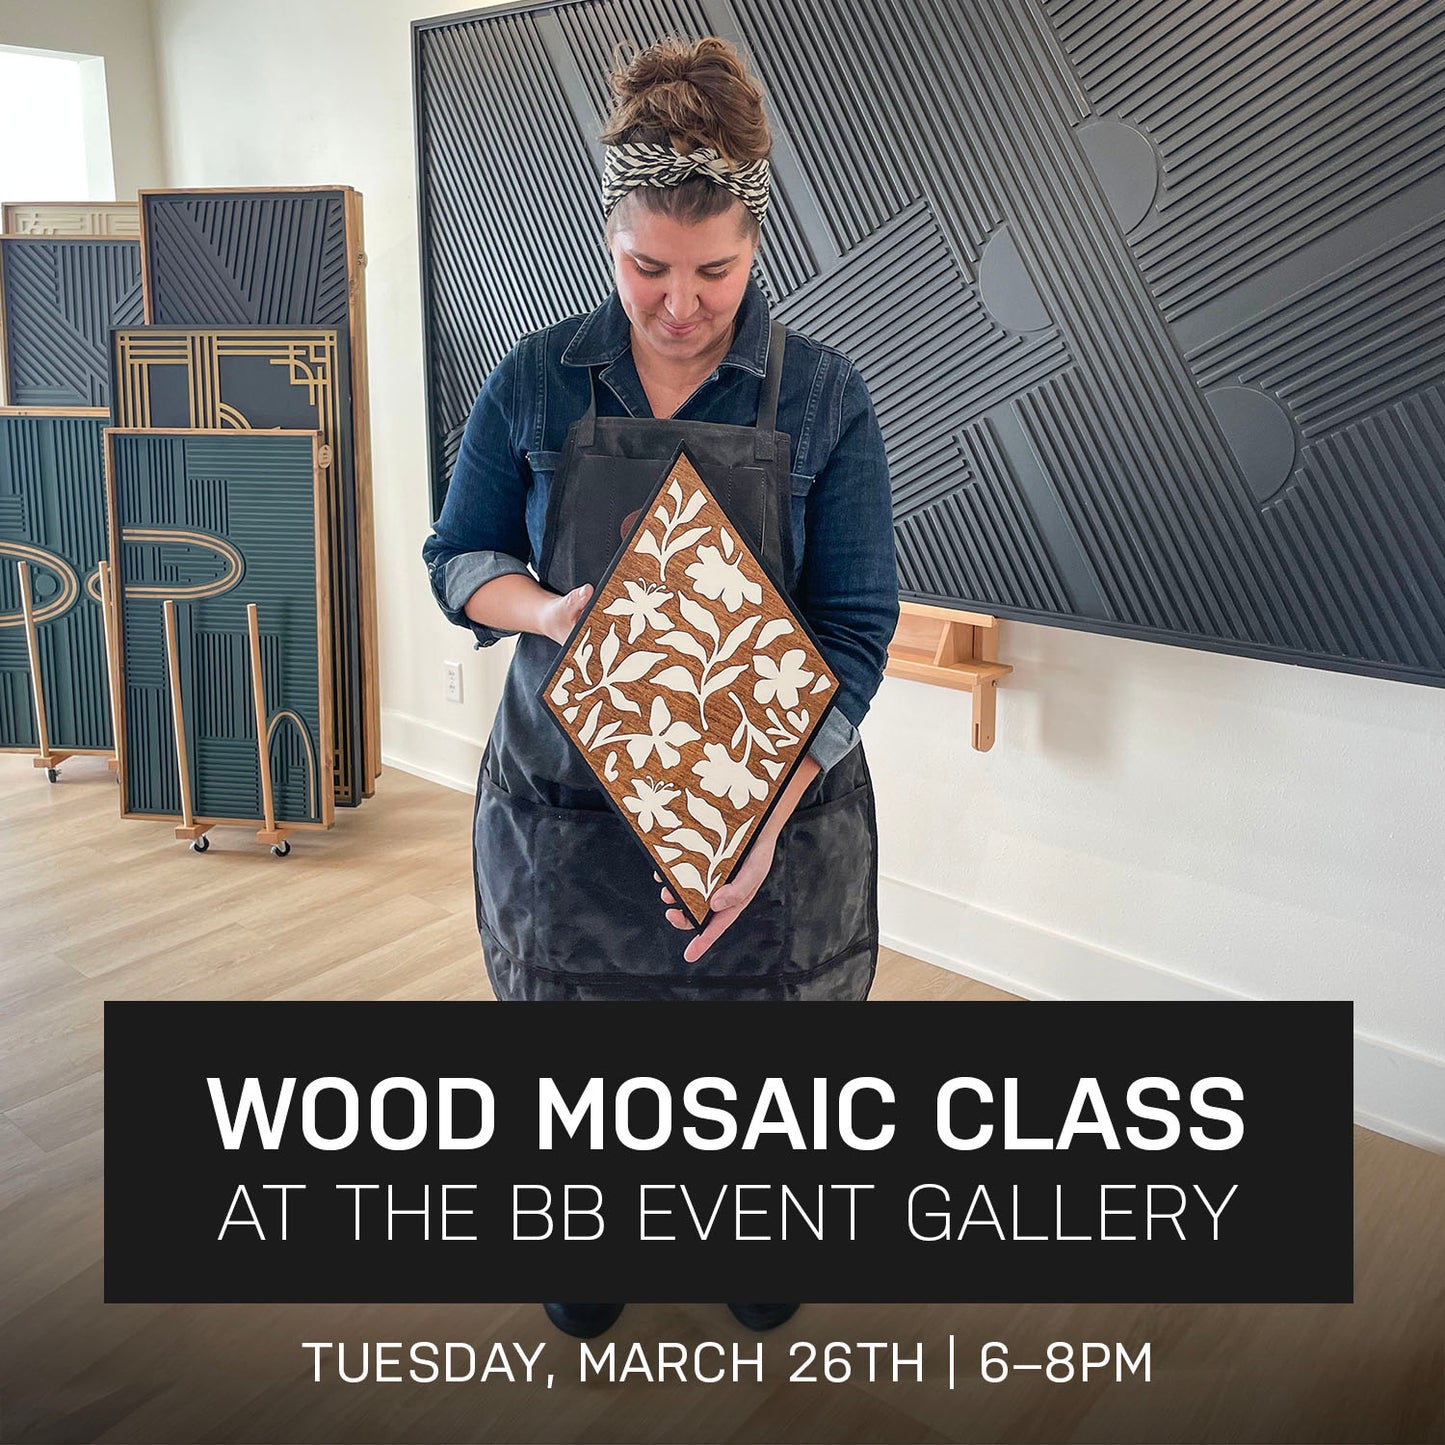 Bloom Wood Mosaic Class at the BB Event Gallery | March 26th @ 6pm